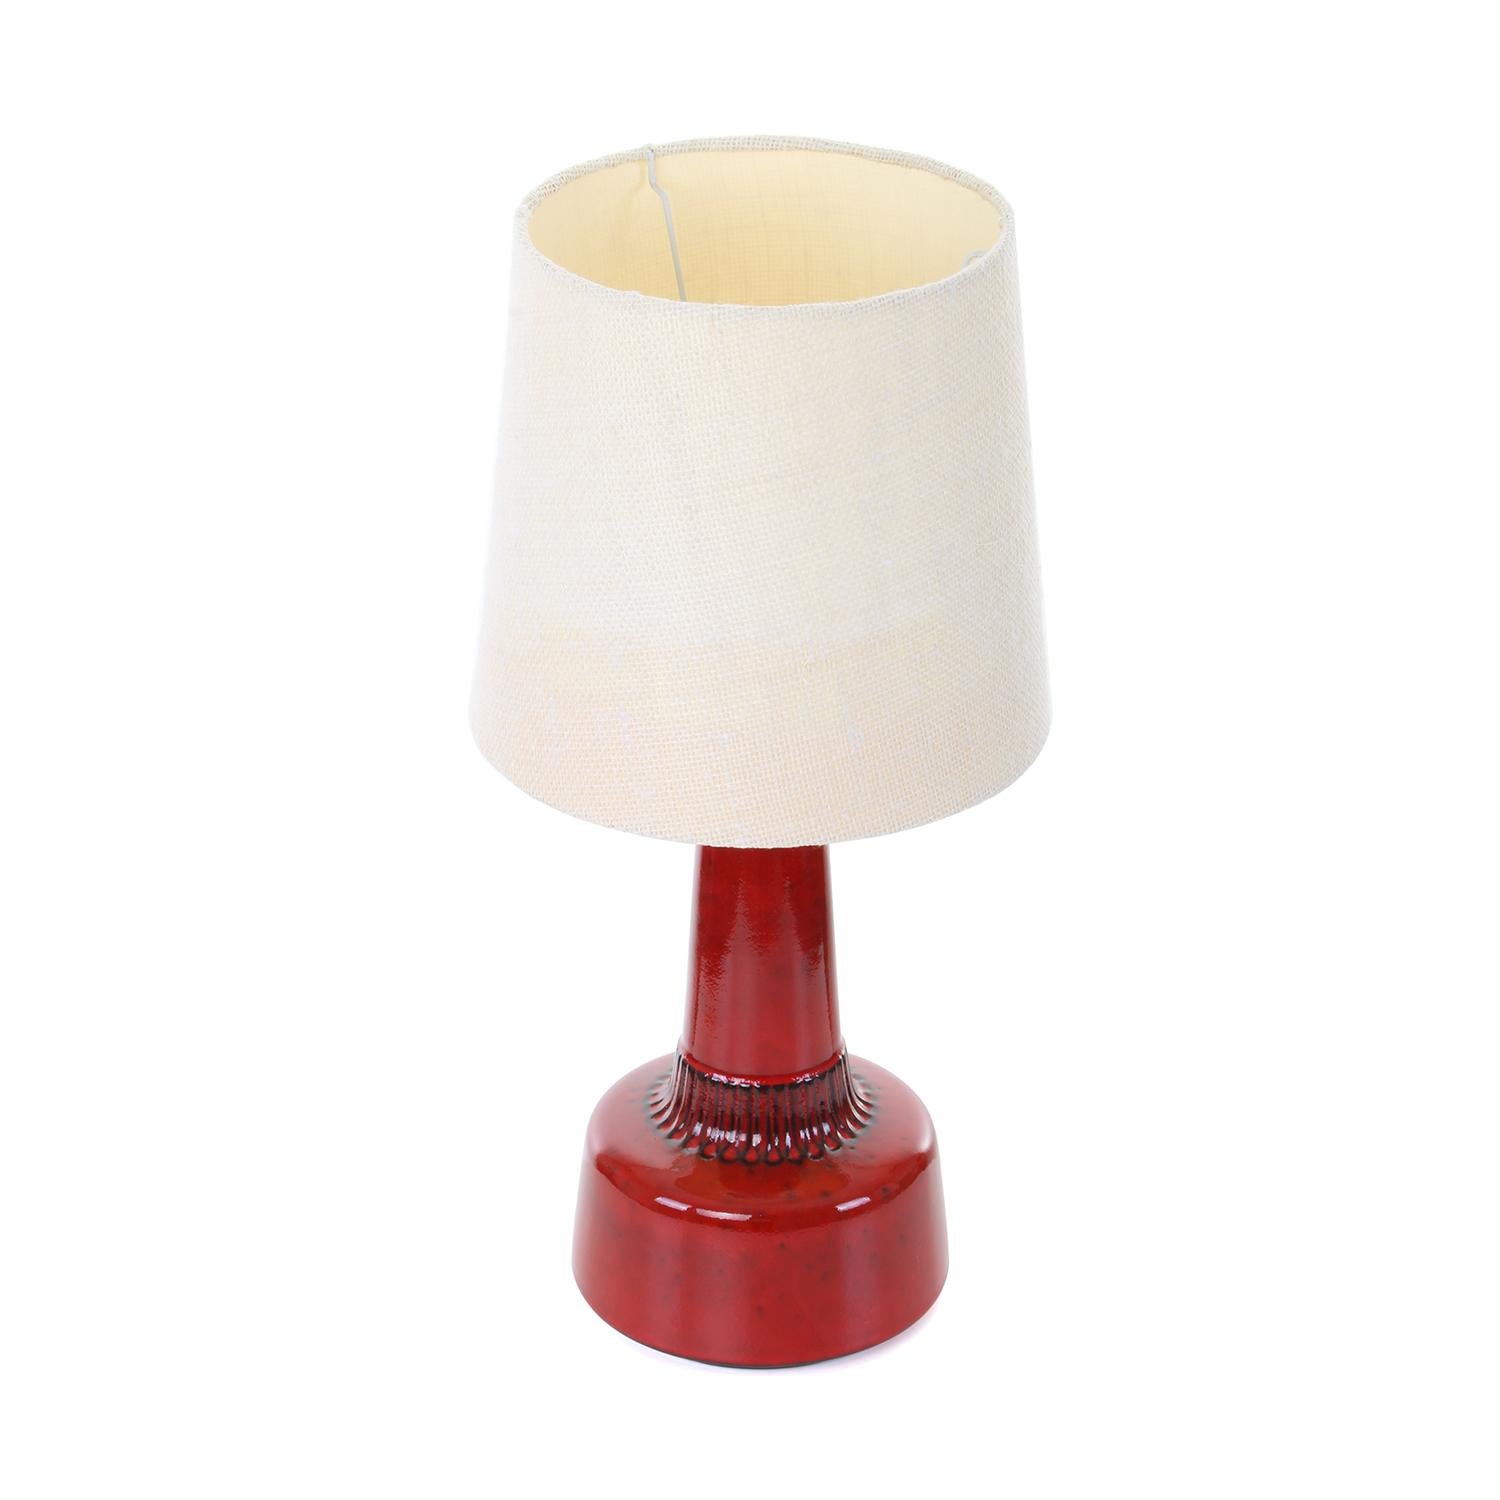 Glazed Red Table Lamp No. 1080-2 by Einar Johansen for Soholm, 1960s, Shade Included